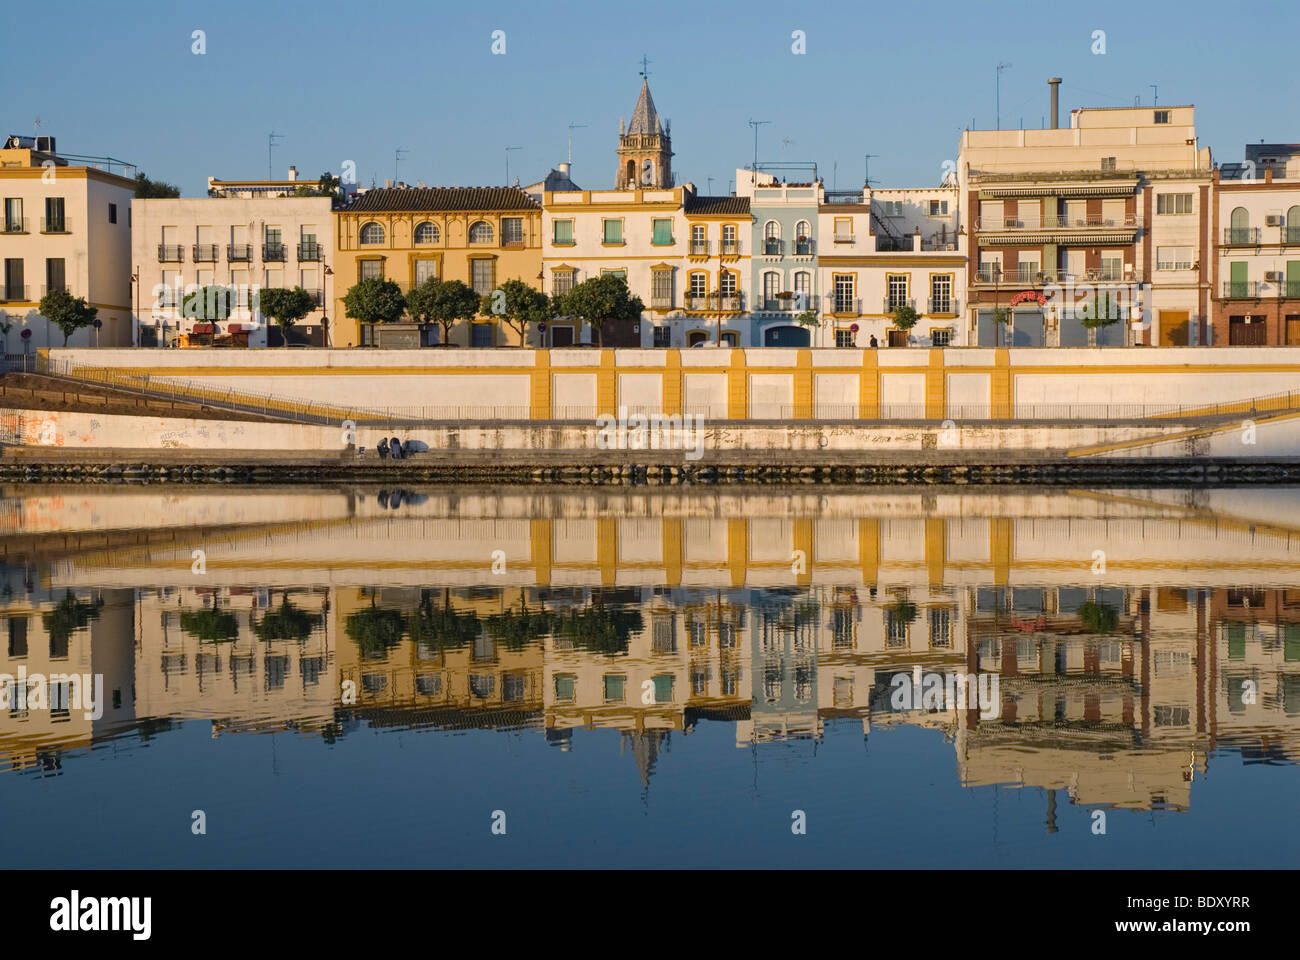 Houses from Triana reflected in the calm waters of the Guadalquivir river, Seville, Spain, Europe Stock Photo